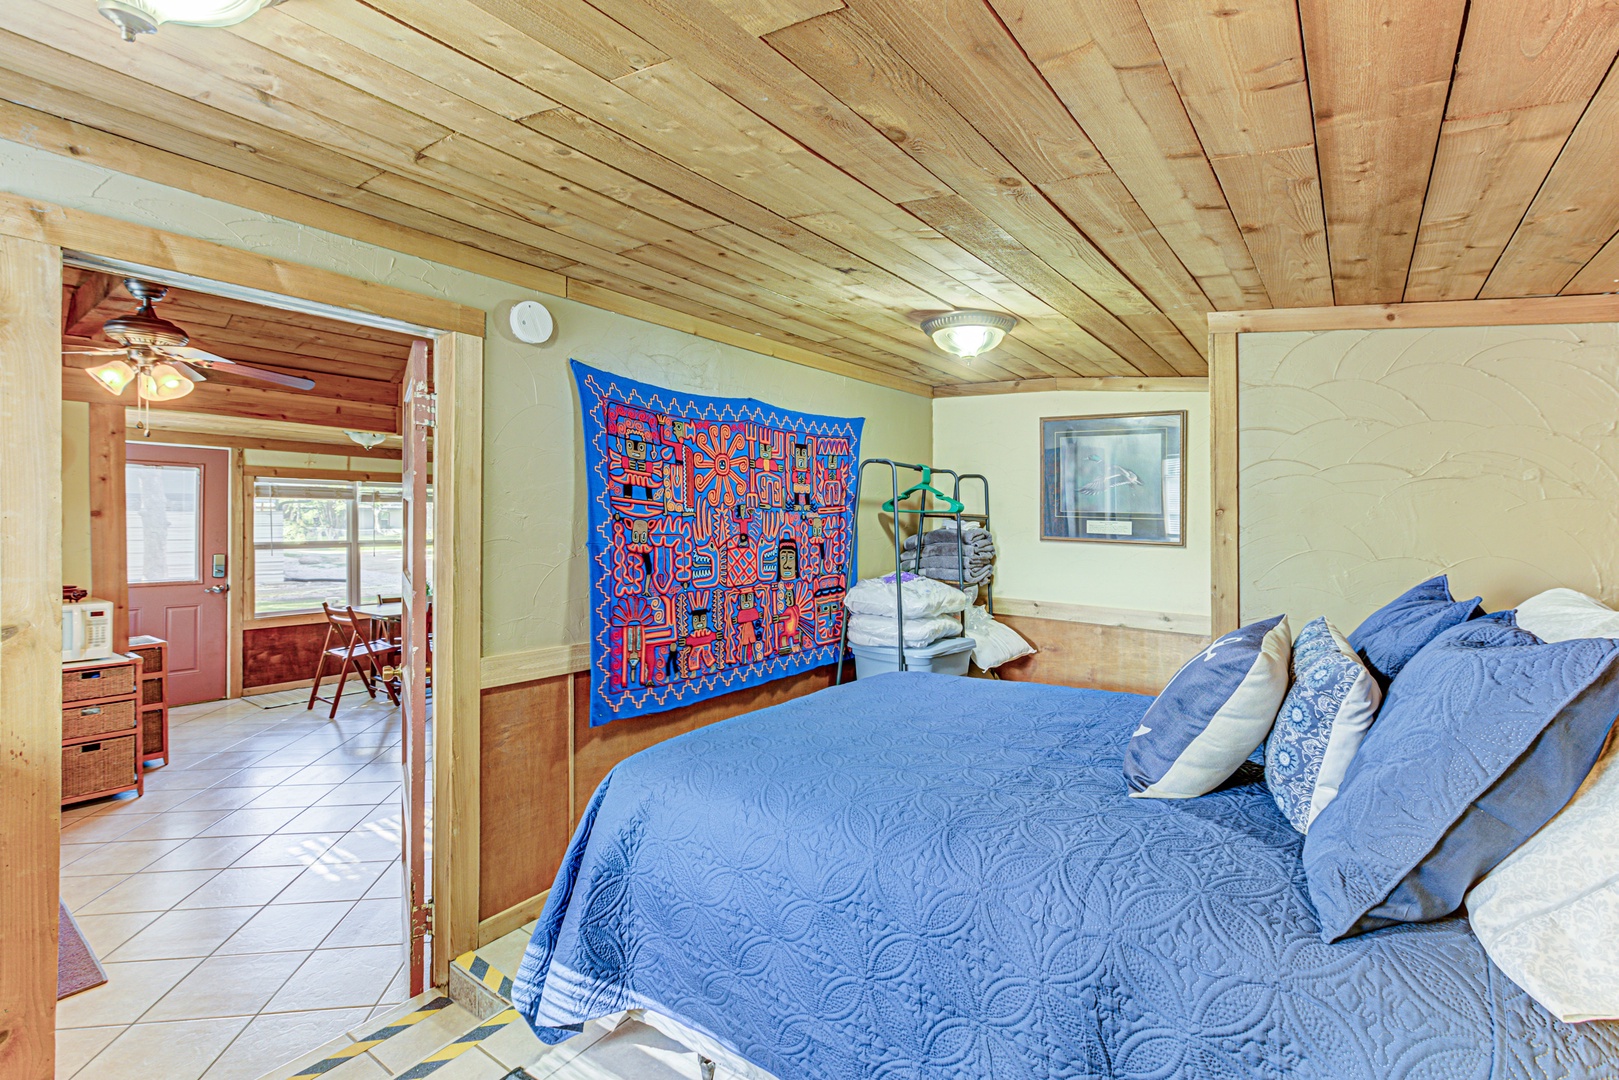 The casita’s cozy bedroom retreat features a plush full-sized bed